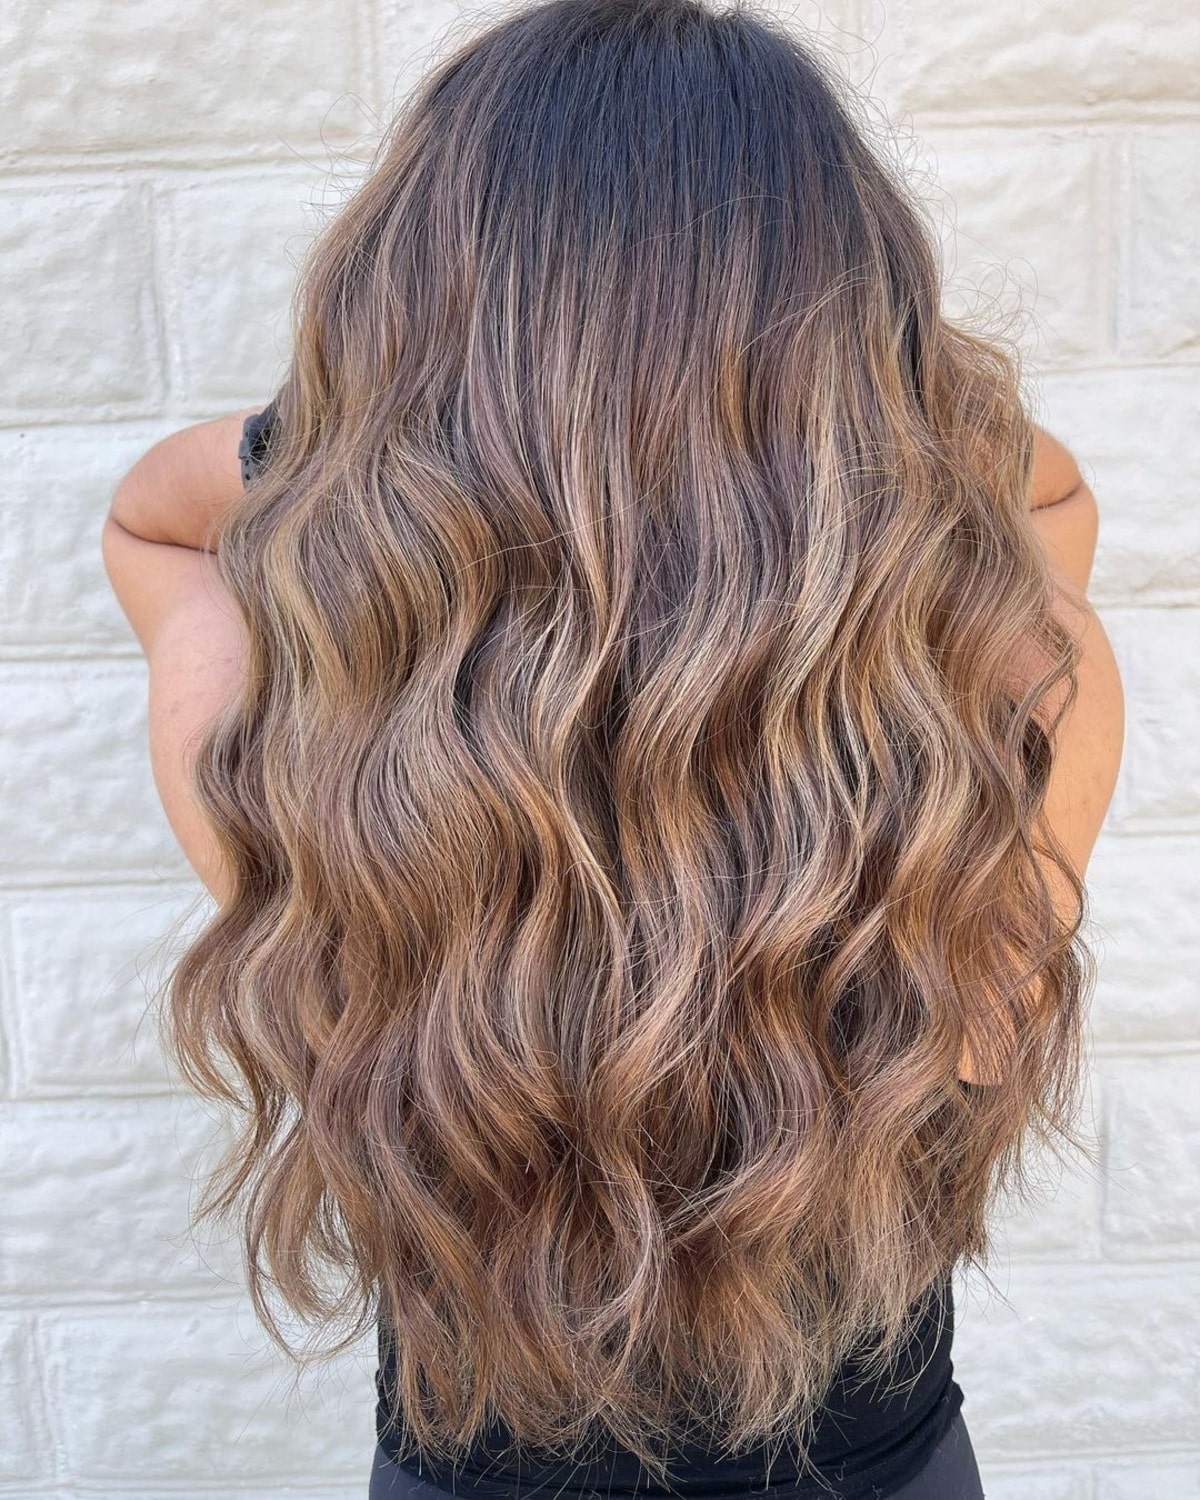 Blended balayage with brown and blonde tones 